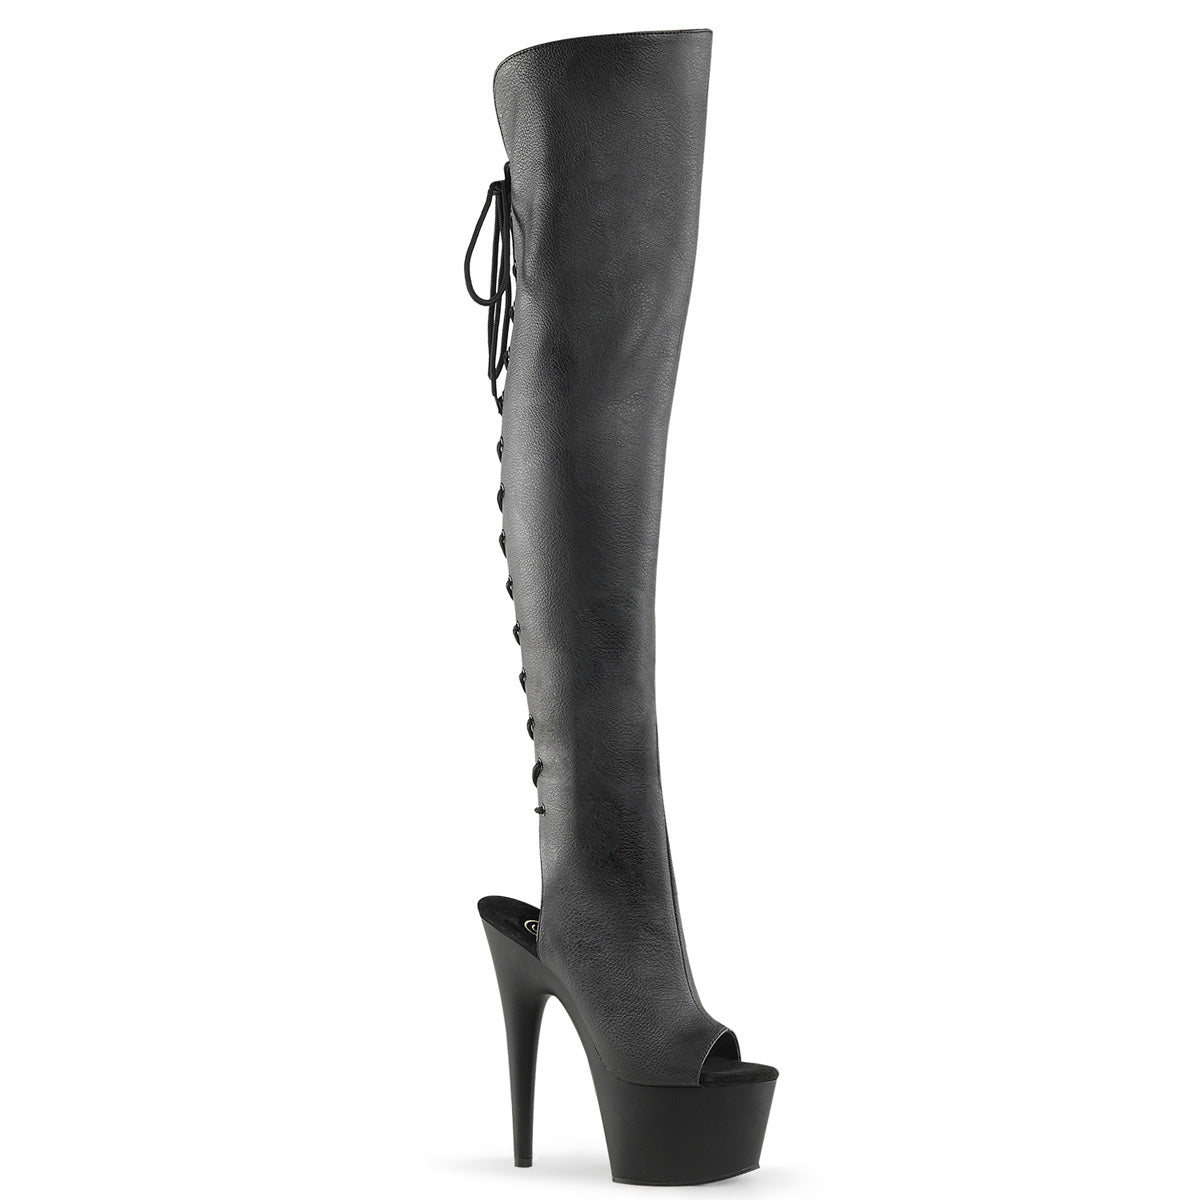 ADORE-3019 Thigh High Boots Black Multi view 1